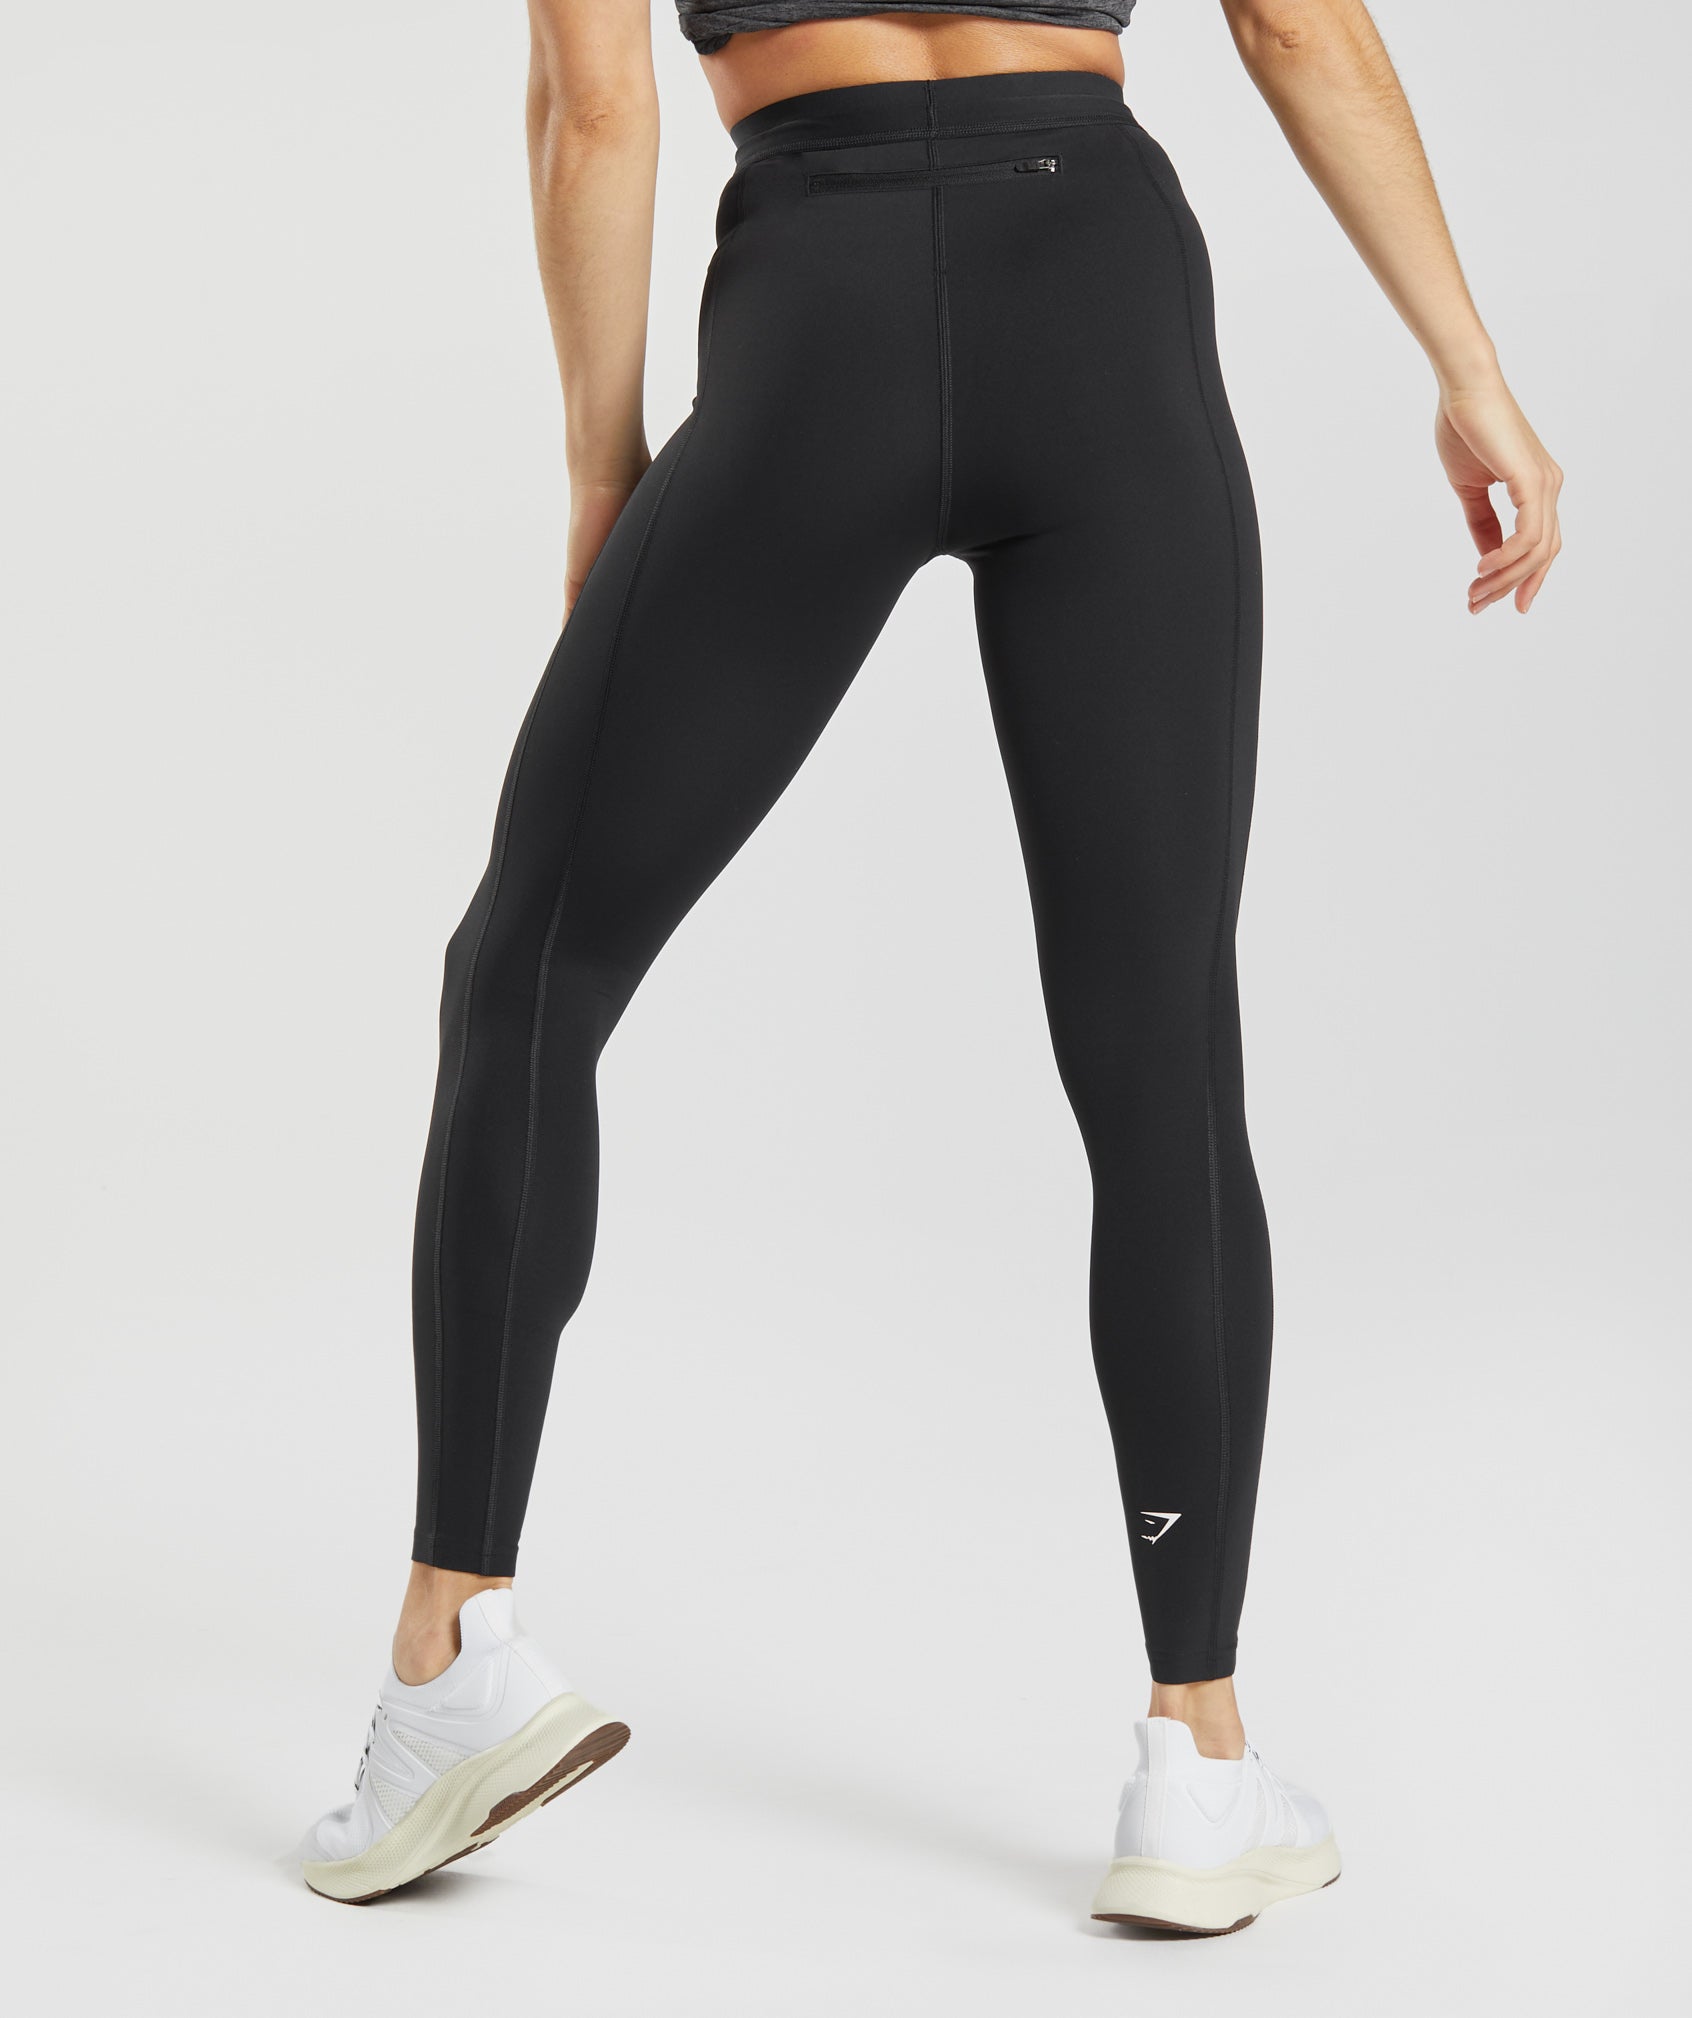 black leggings high waist seamless and perforated. compression, covering,  and with a great price.bomb fit